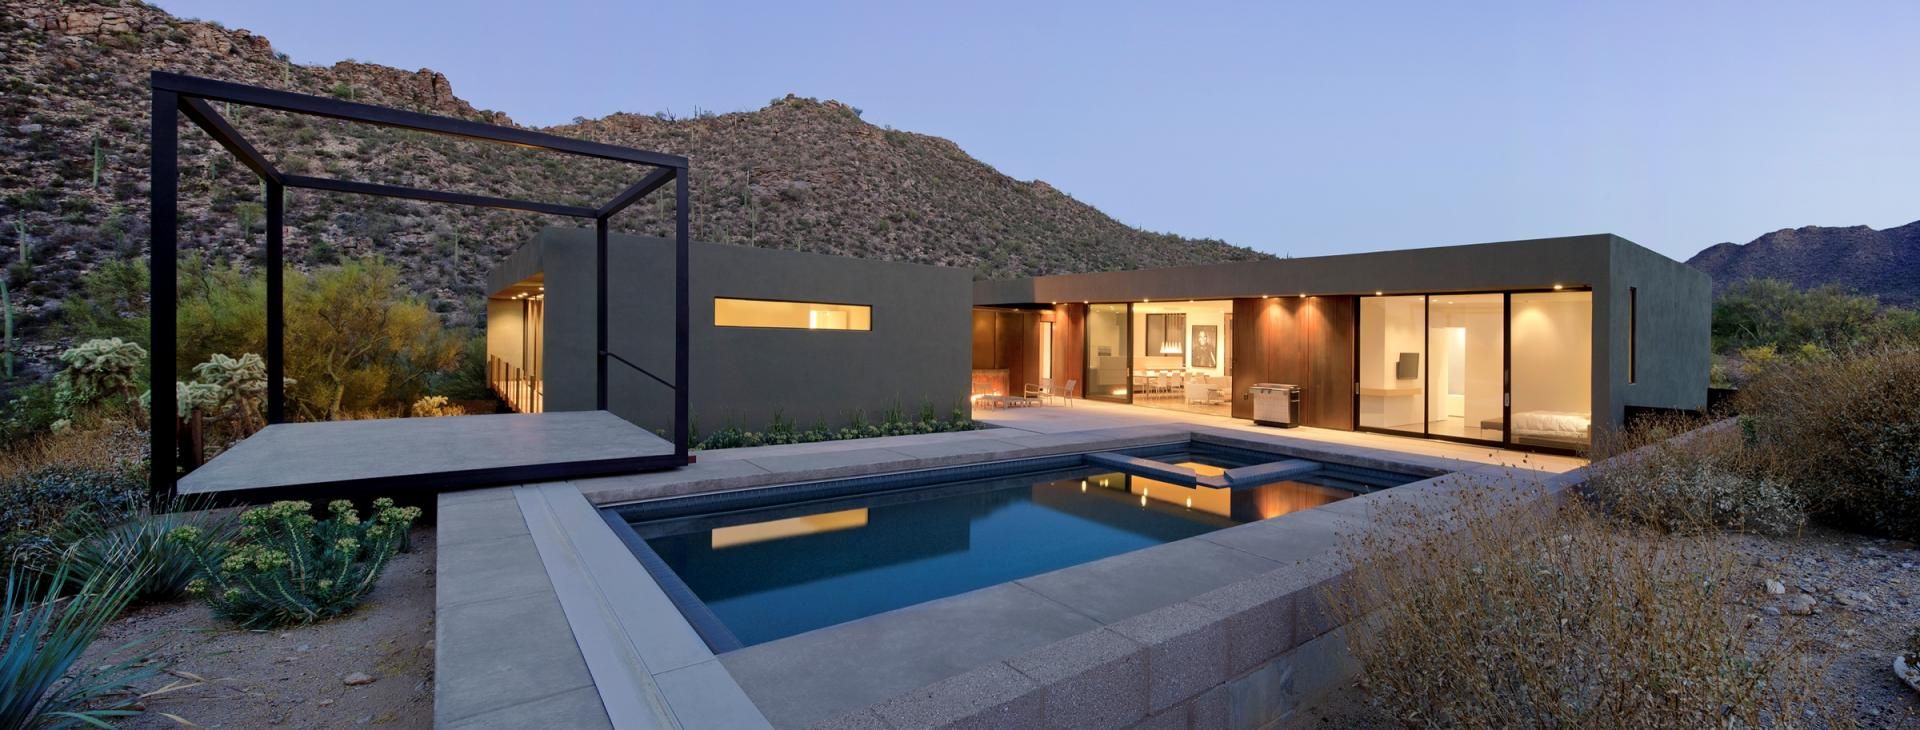 Desert House with Awesome Viewing